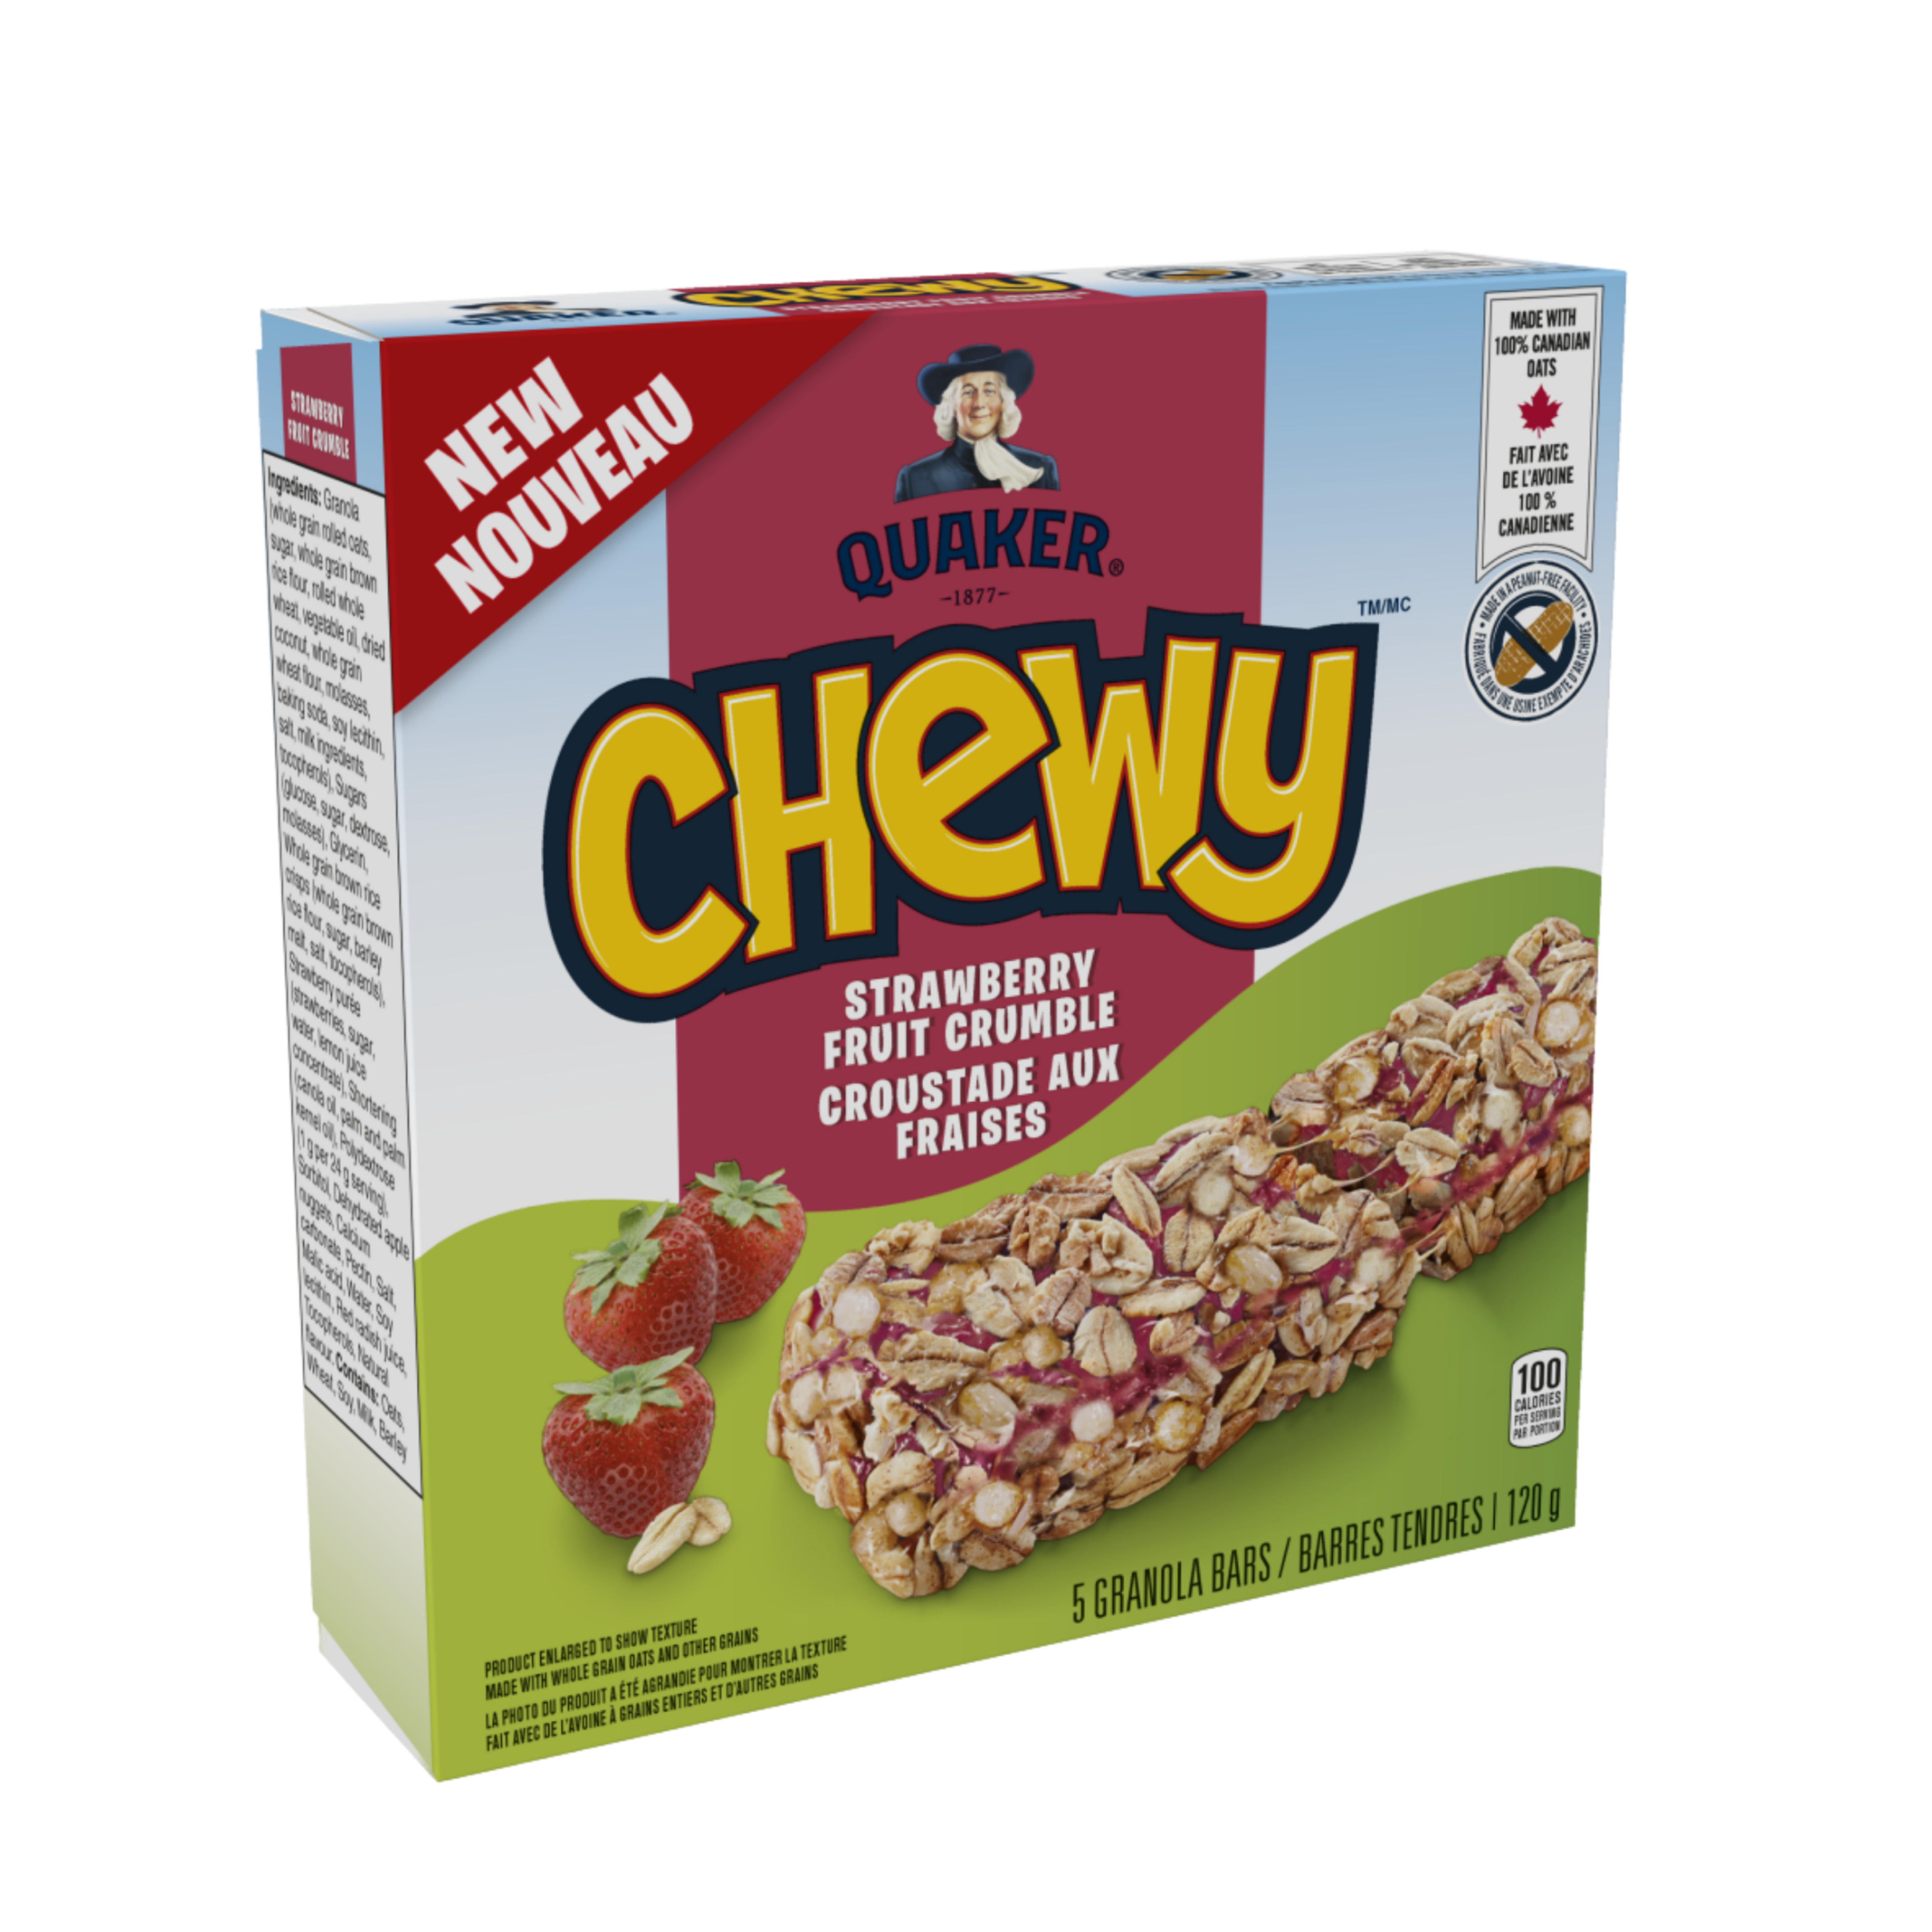 Quaker Chewy<sup>®</sup> Strawberry Fruit Crumble granola bar